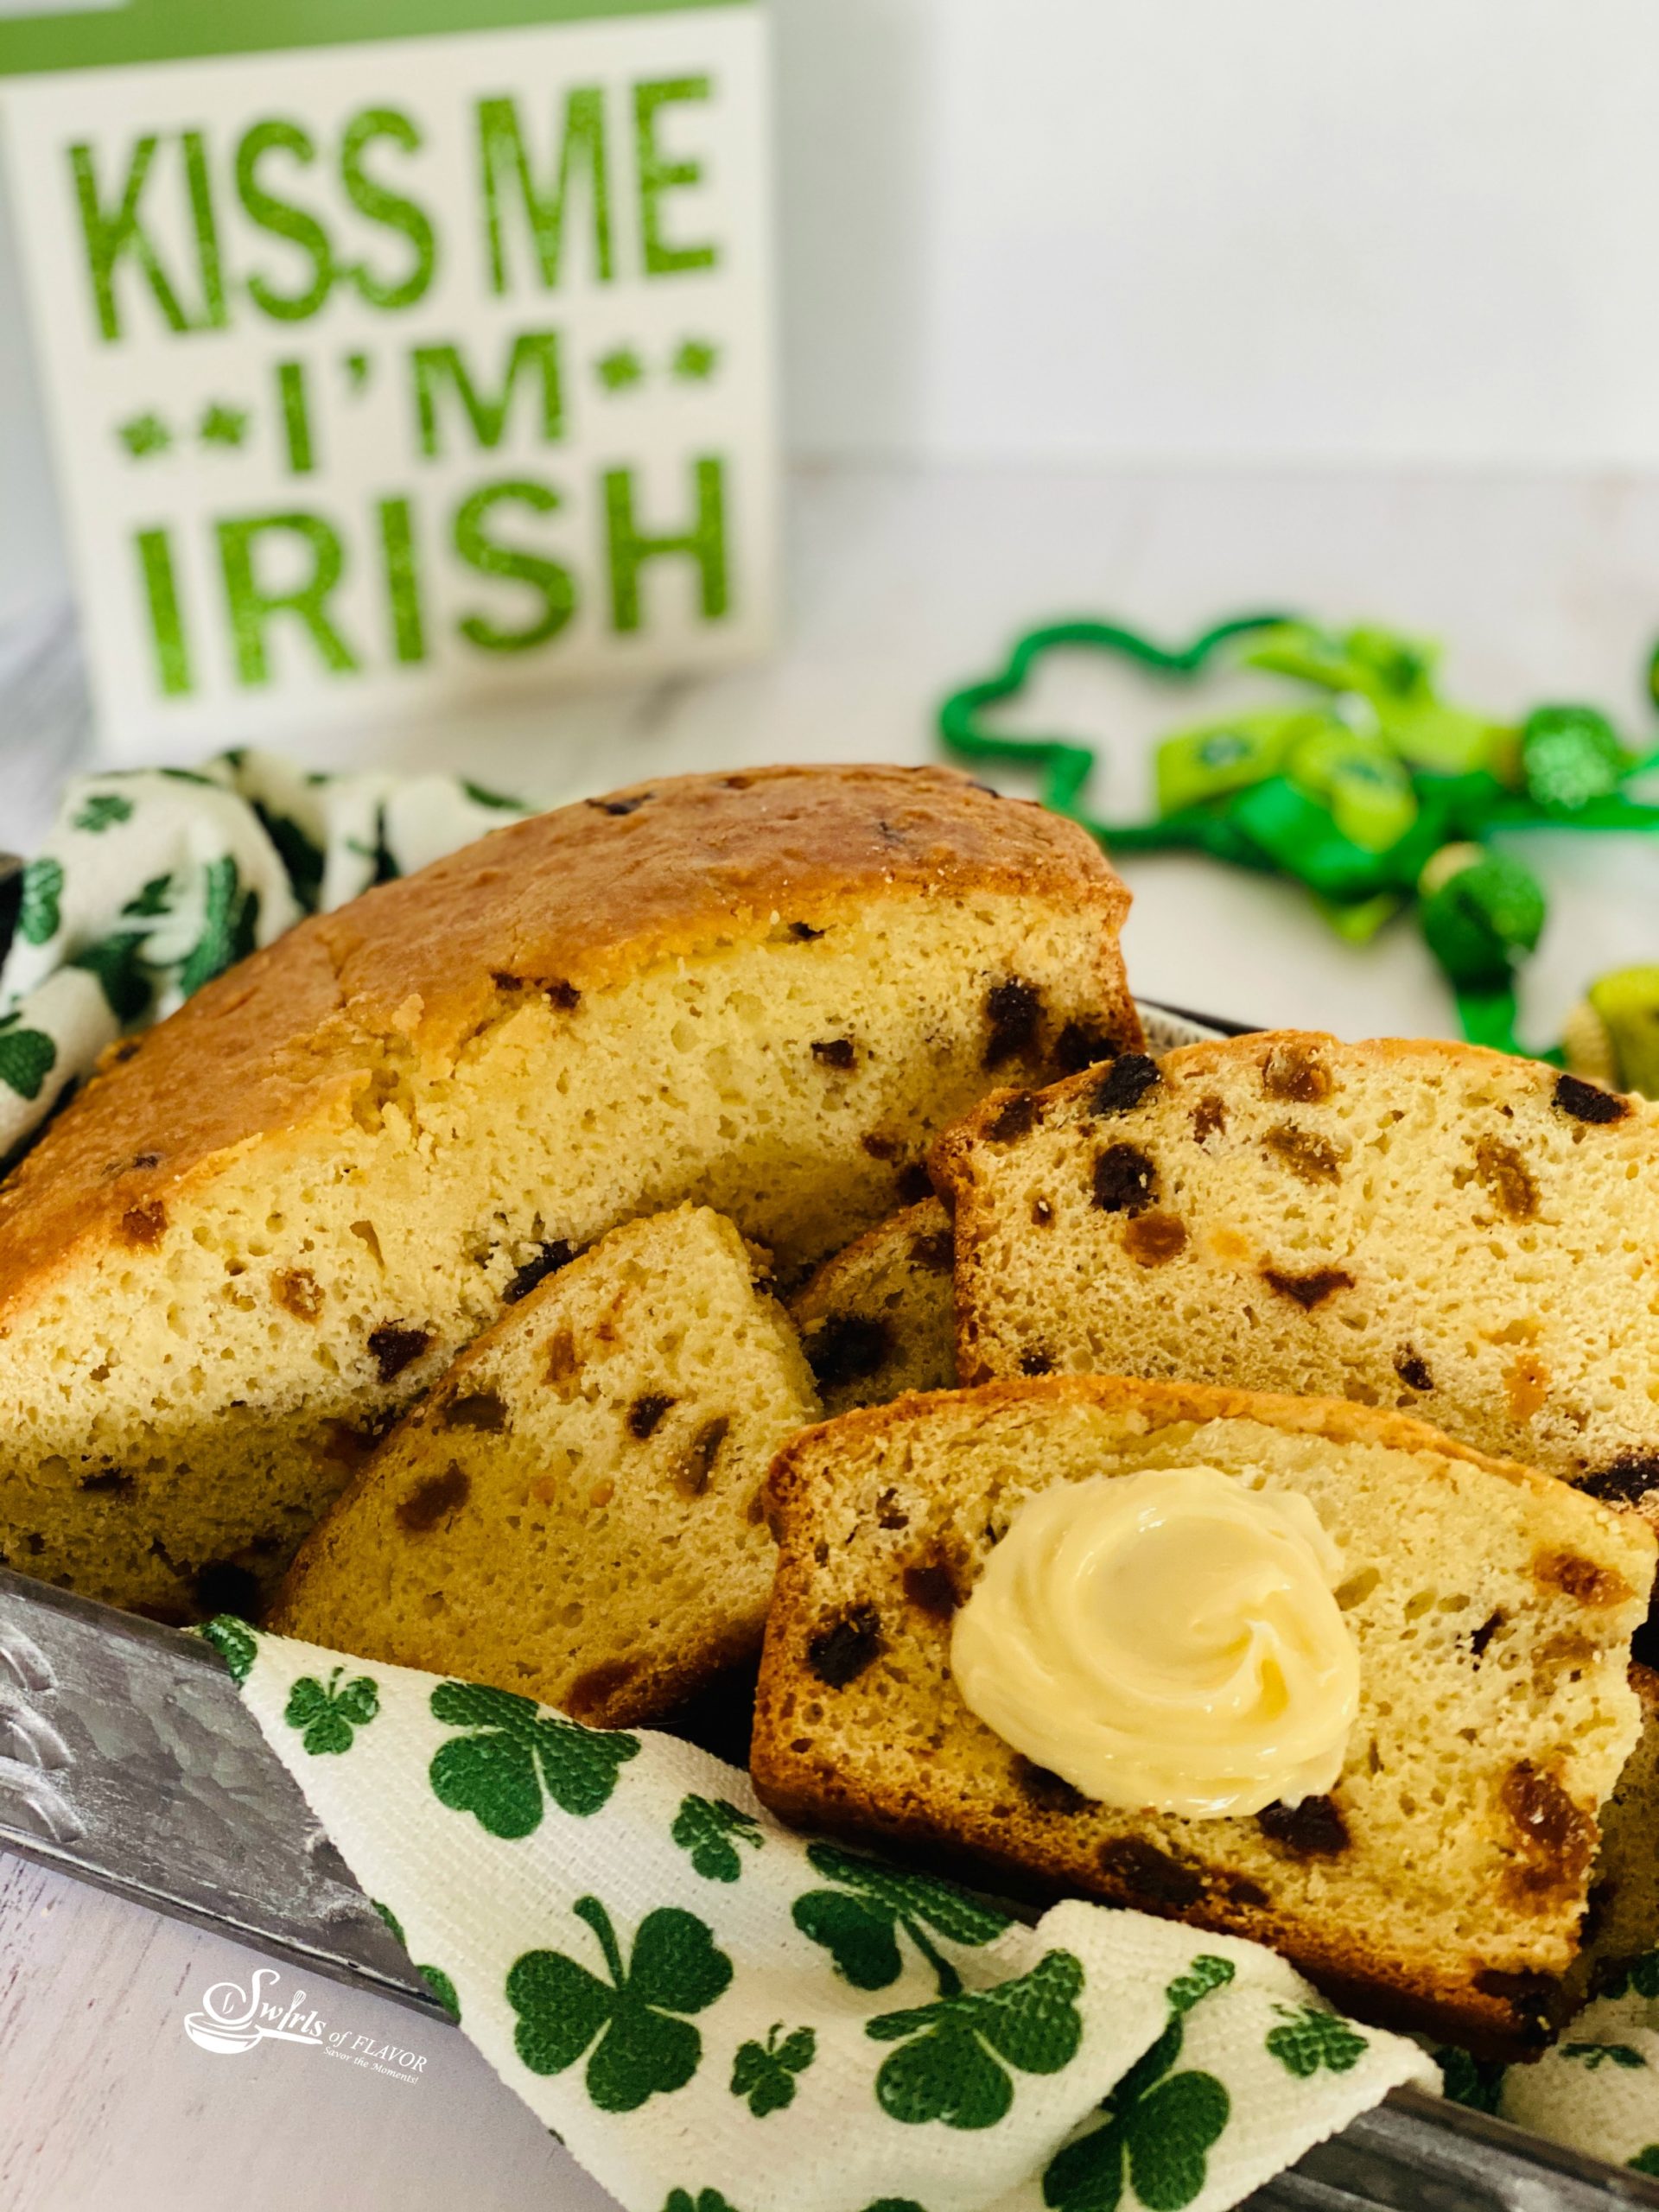 Best Irish Soda BreadRecipe in a basket with slices and butter